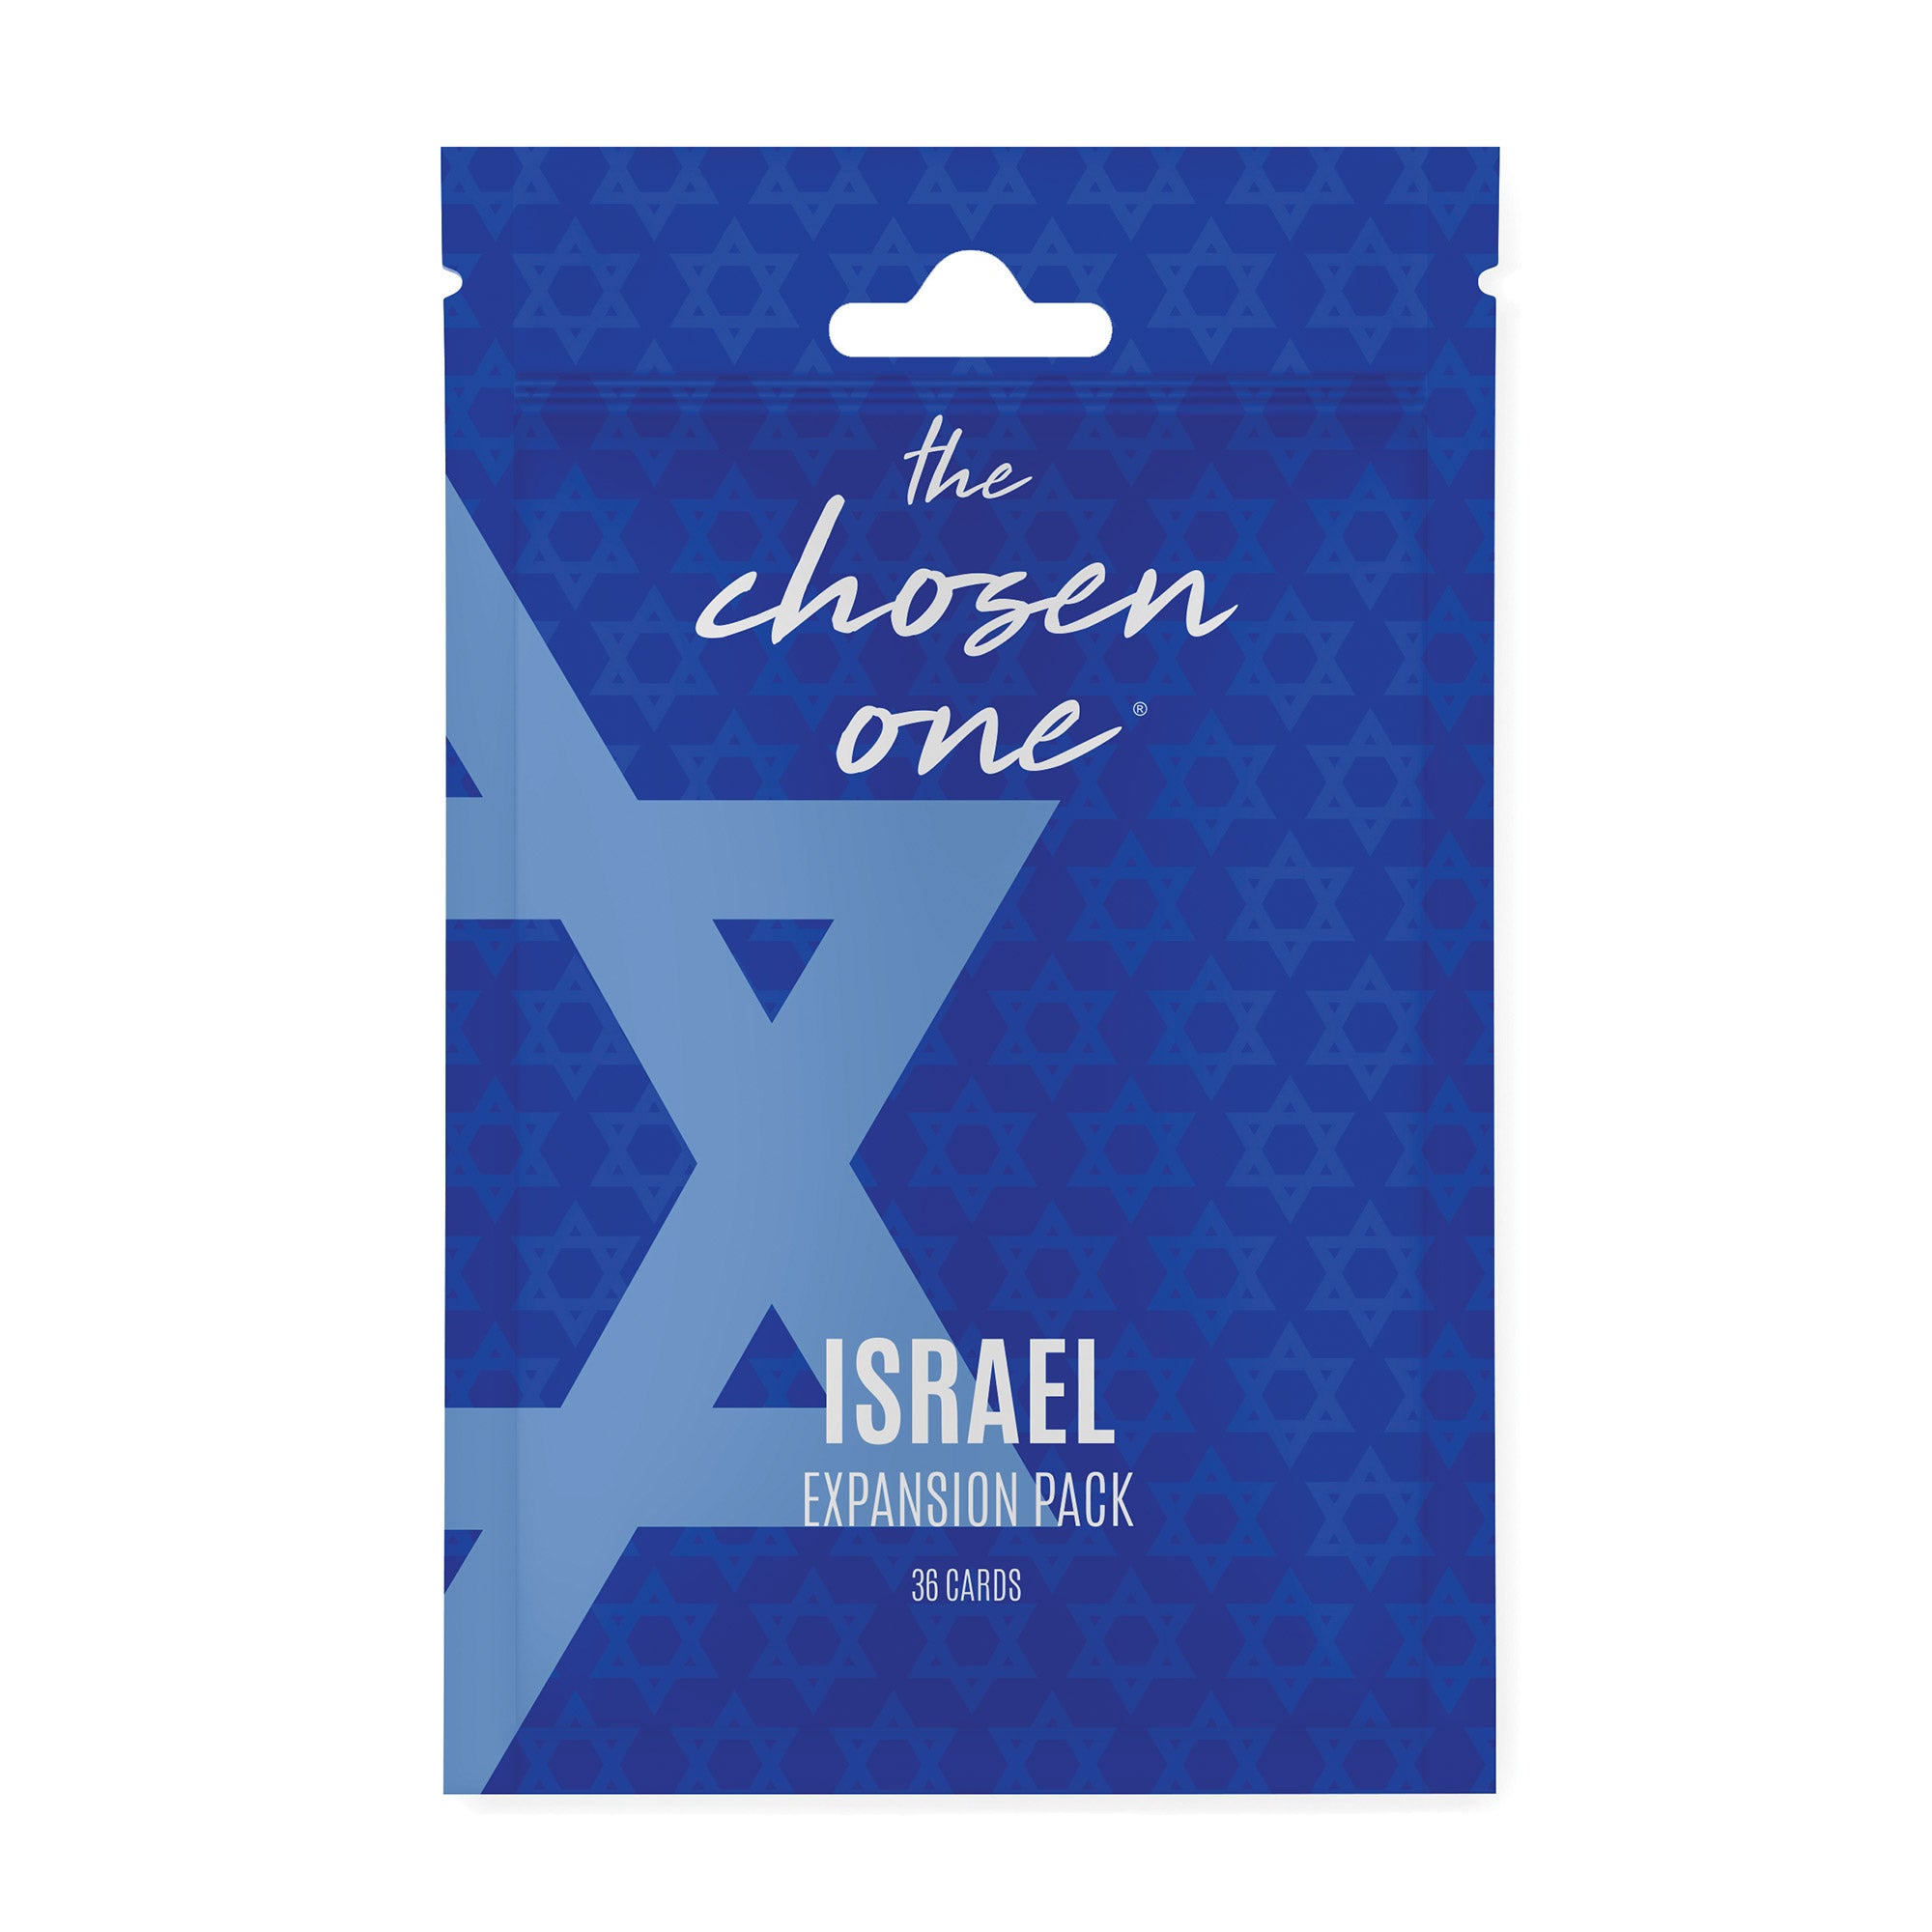 The Chosen One® - Israel Expansion Pack